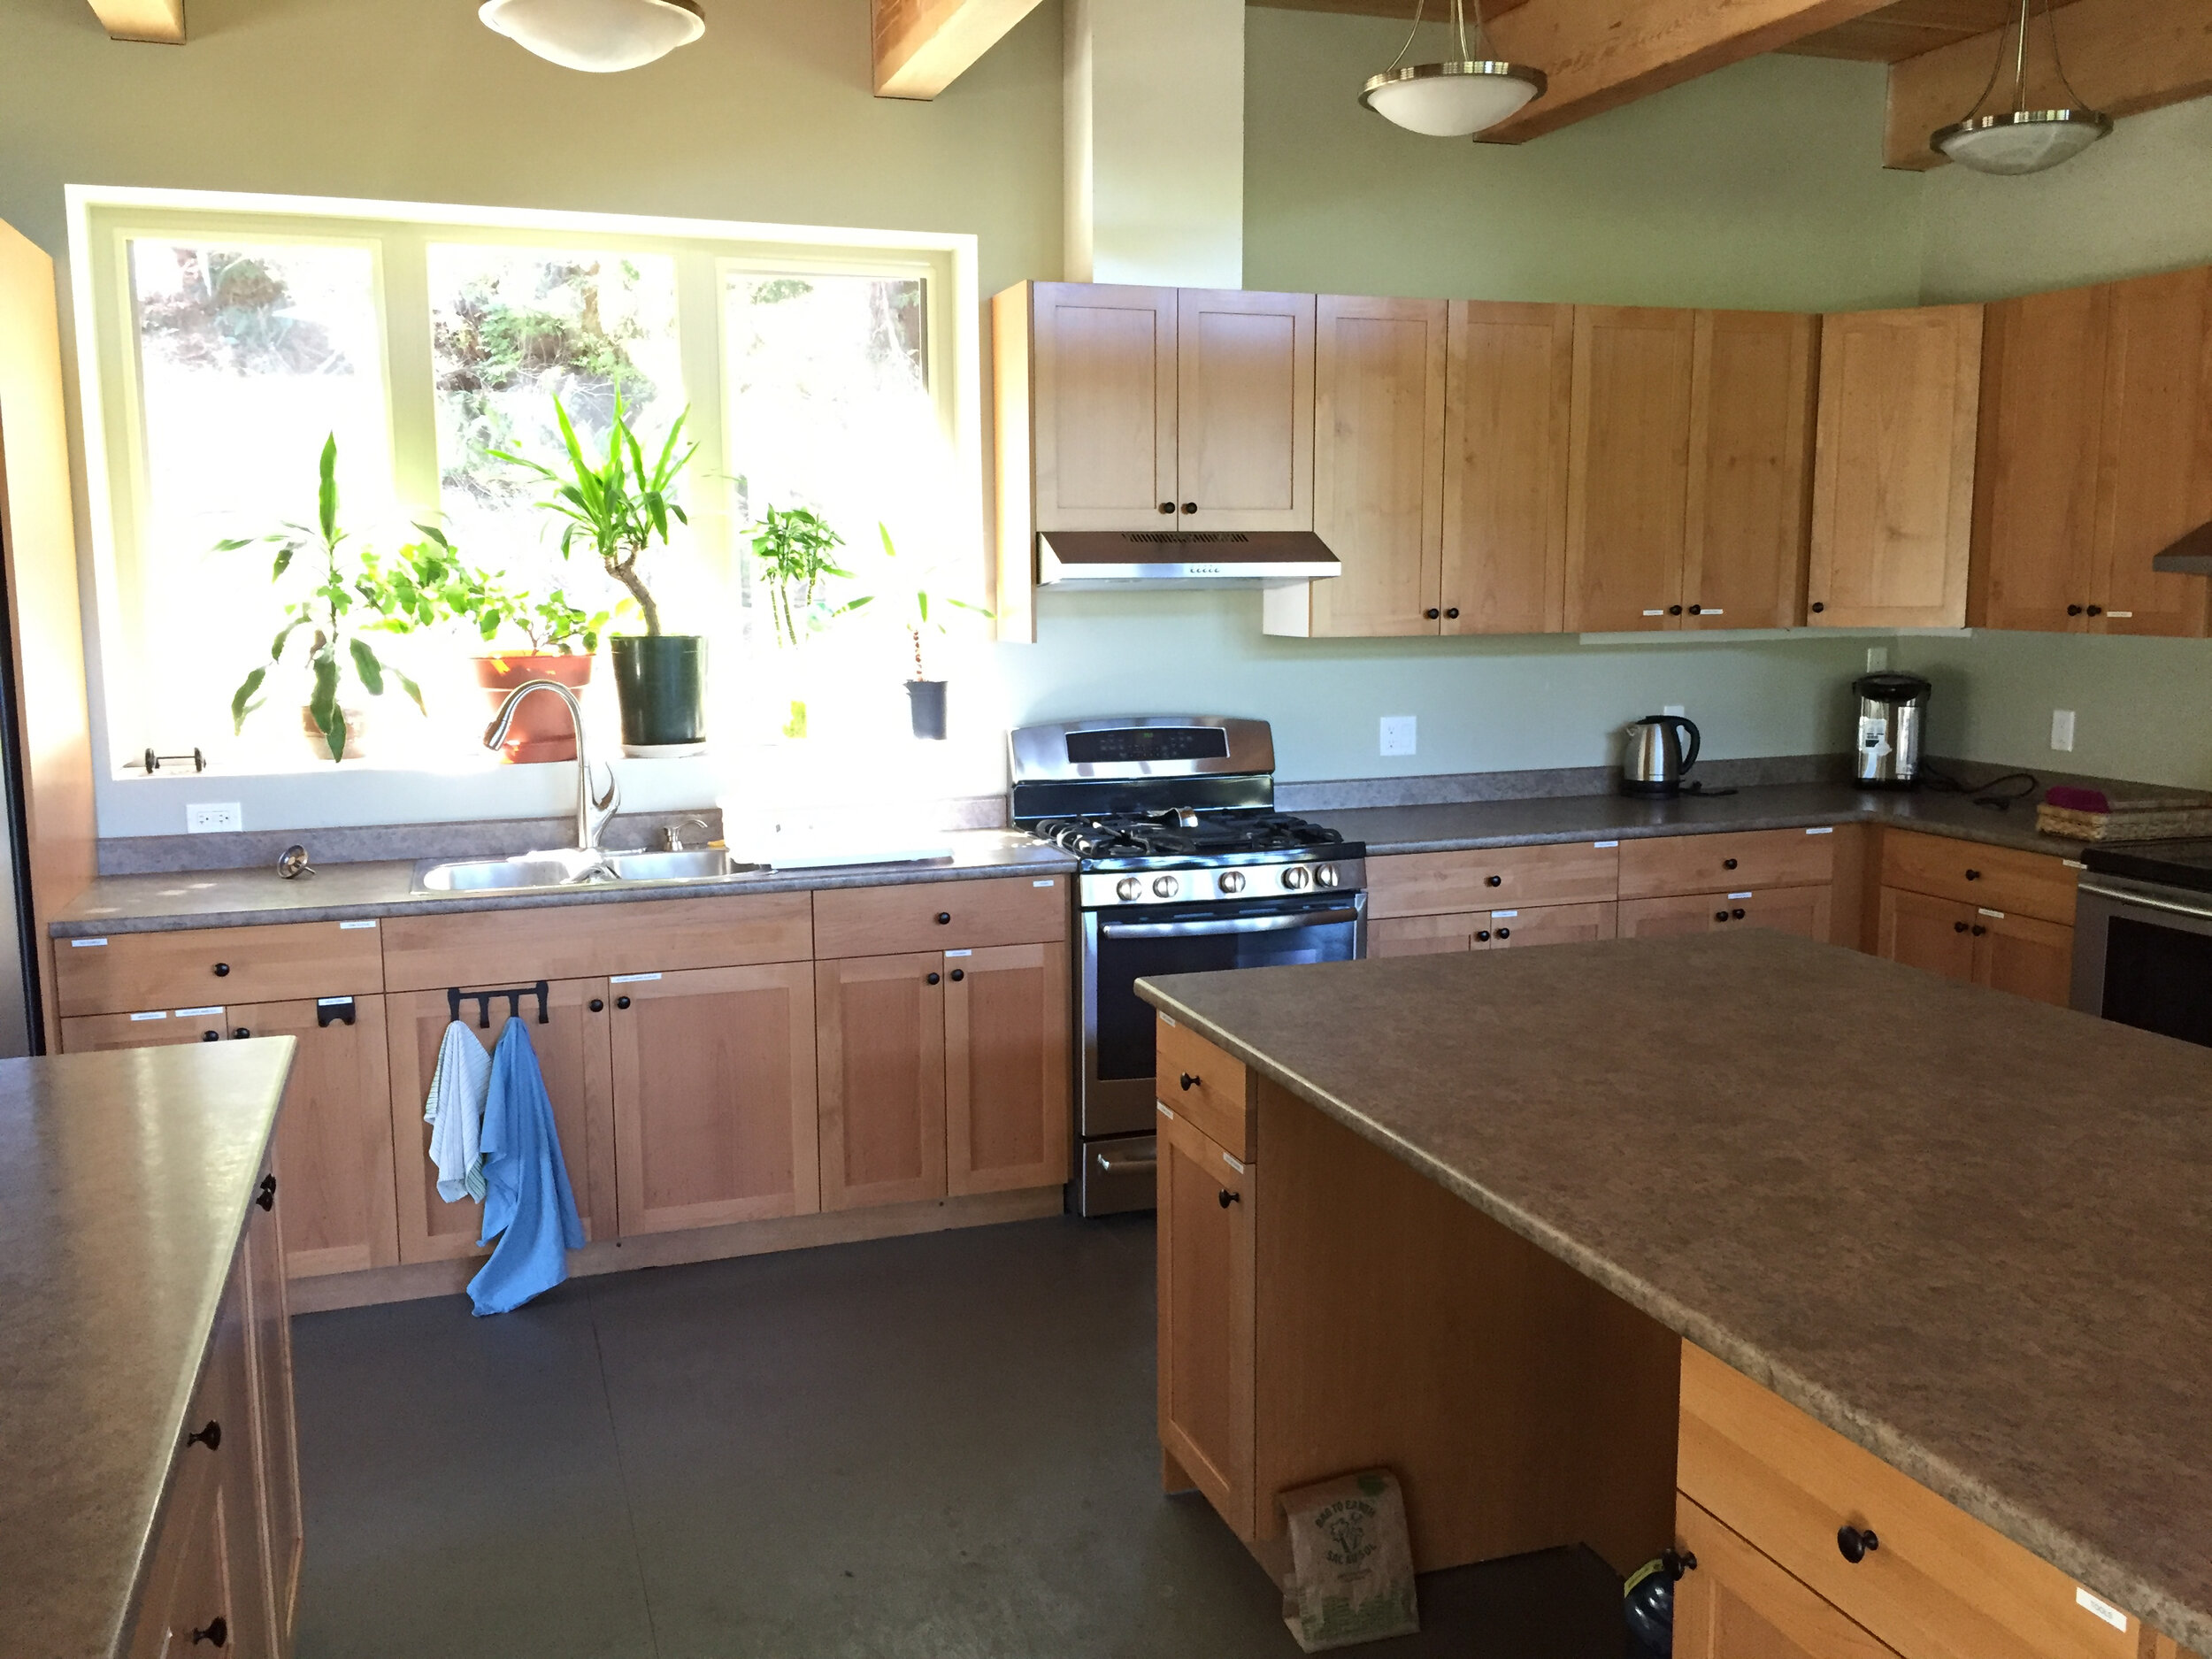 Example of common house kitchen